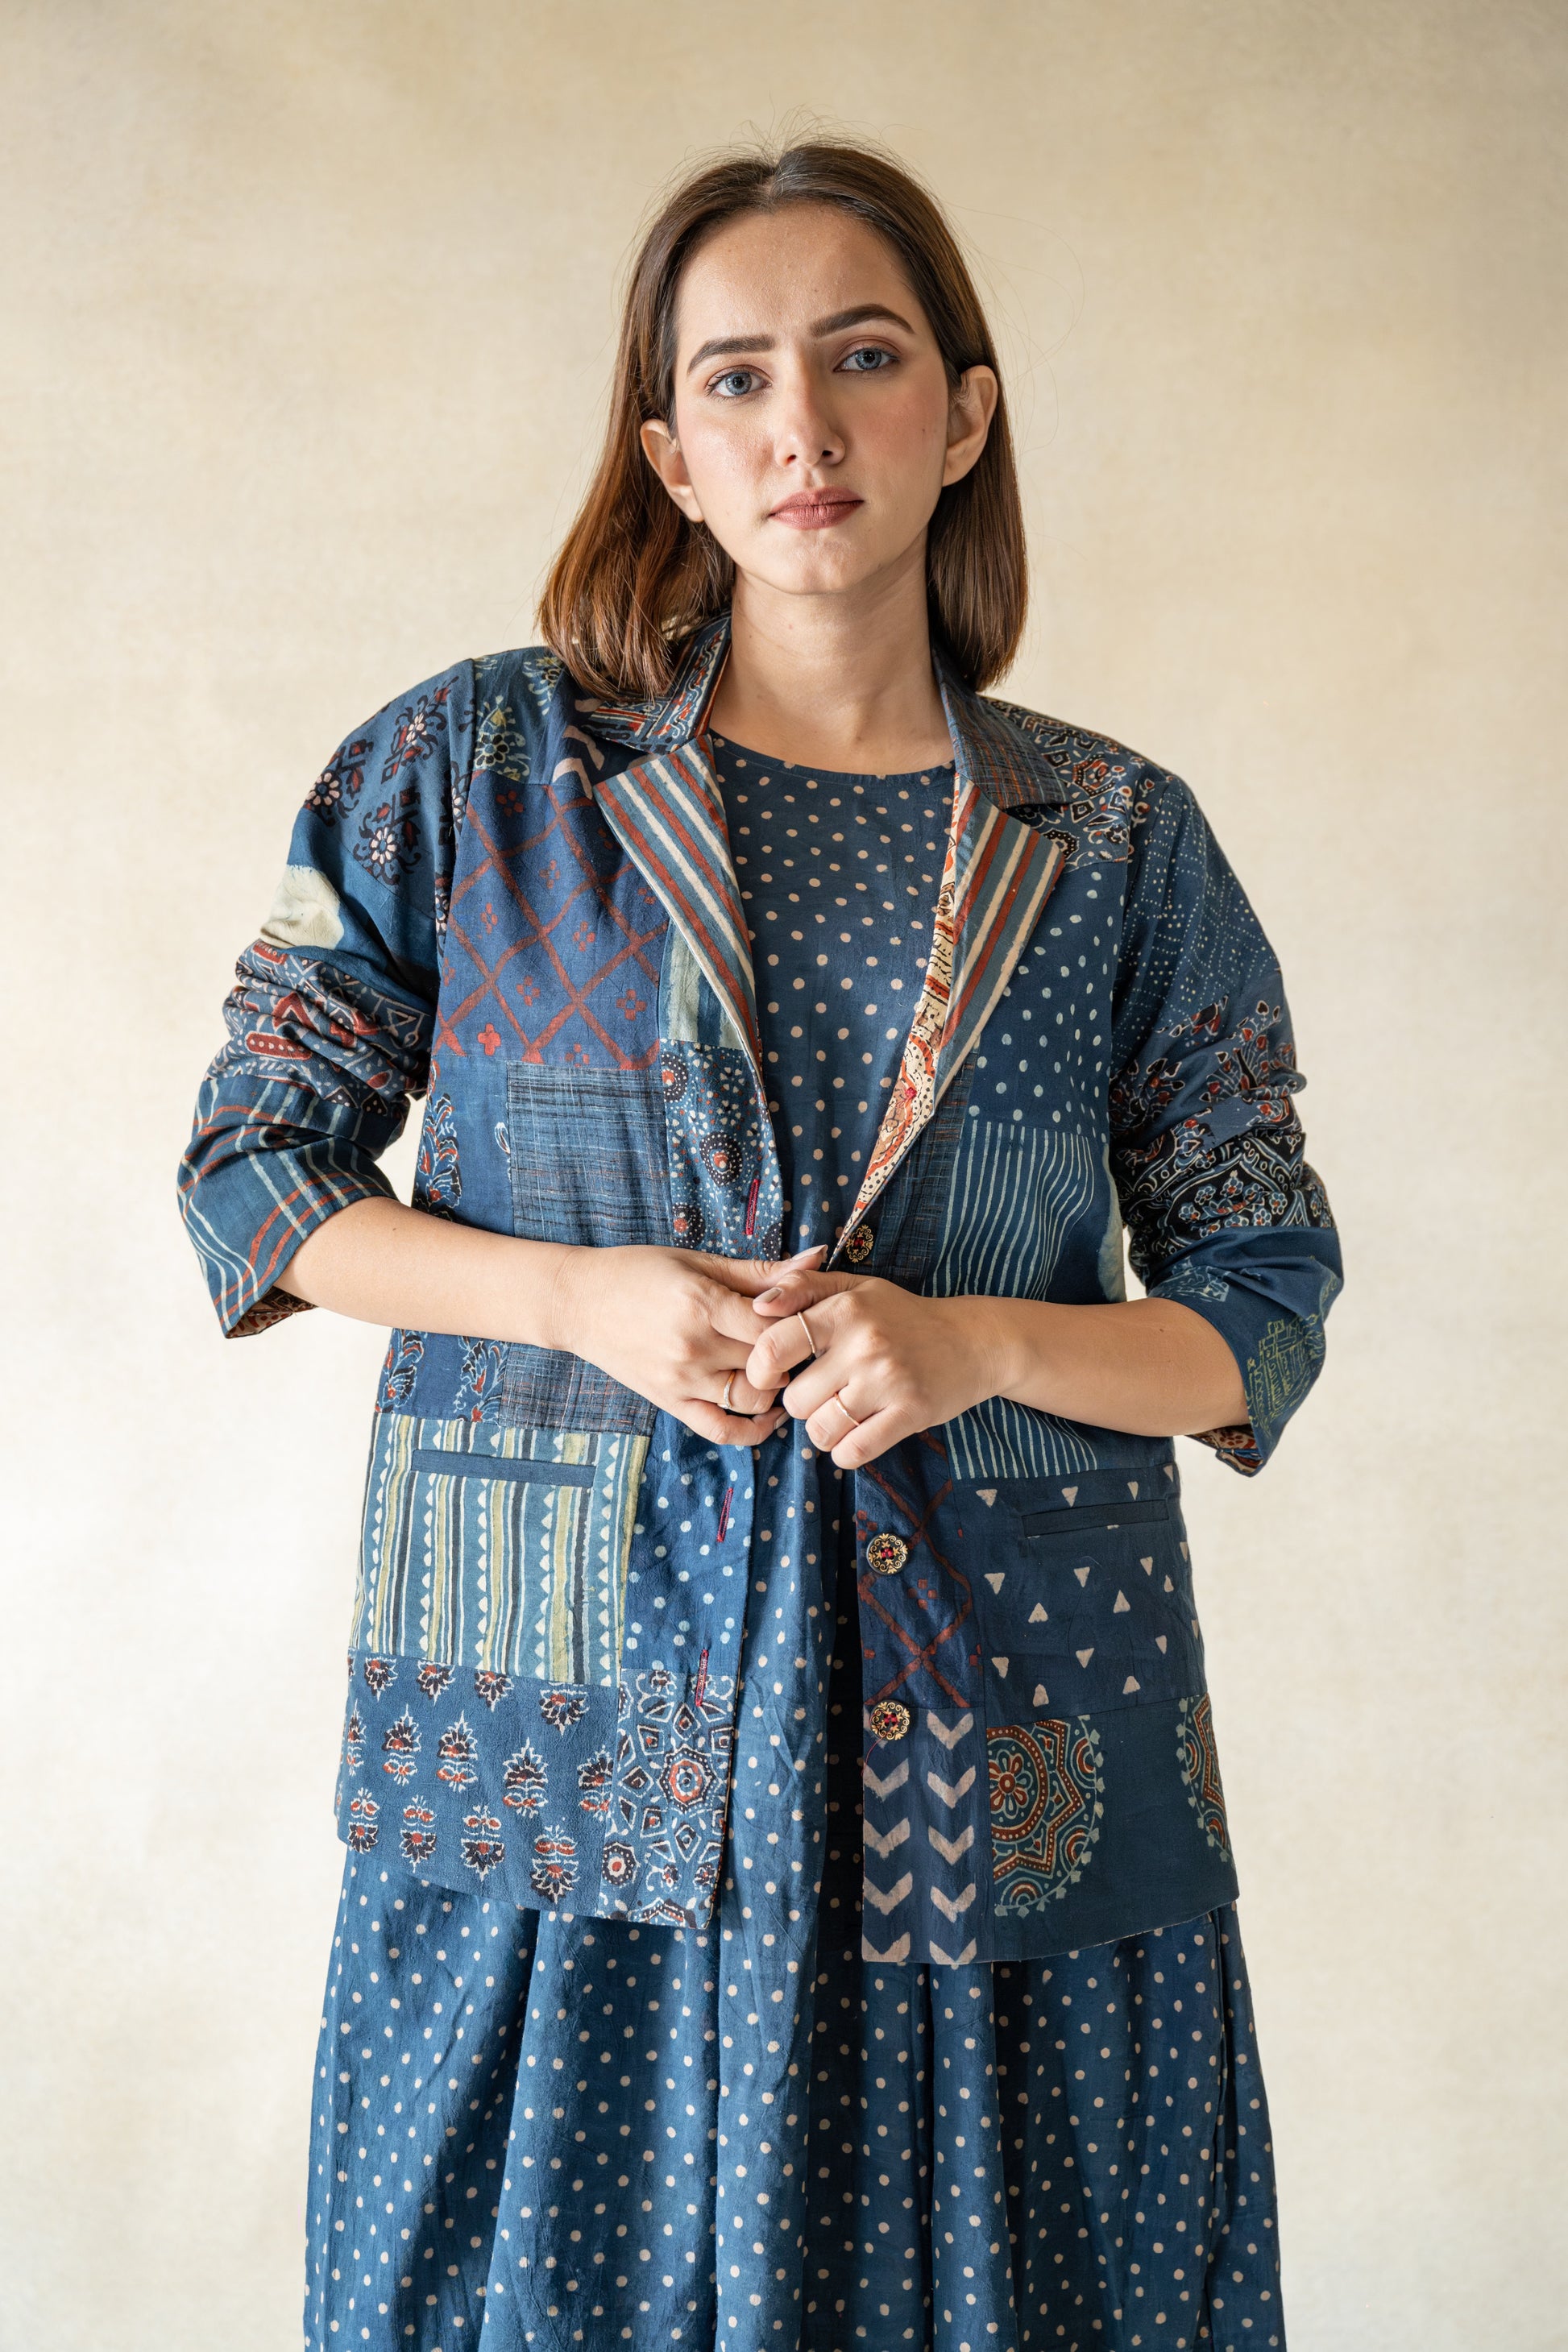 Embrace your adventurous spirit and make a statement with our Indigo Tapestry Fusion - Ajrakh Indigo Jacket, Where Heritage Meets Contemporary. Crafted with natural indigo dyed fabrics and multi-ajrakh hand block prints, this jacket is a masterpiece of slow made artistry and bohemian style. Its notch collared neck, full sleeves, and luxurious ajrakh lining create a one-of-a-kind piece that will elevate any outfit. Stand out from the crowd with this uniquely stylish jacket!